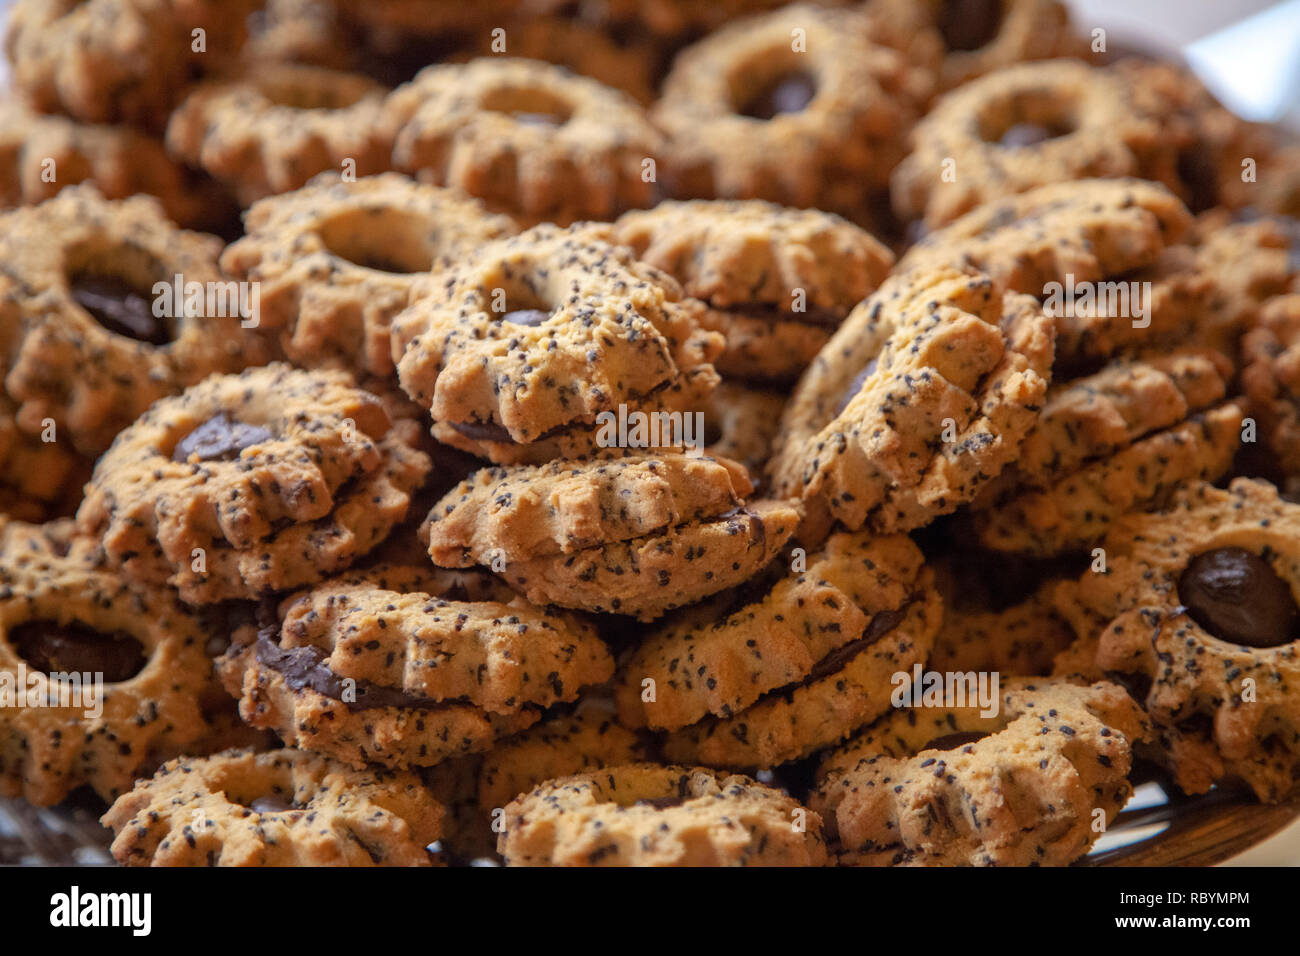 Biscuits and Confection at Bakery Cafe in Jerusalem Old City - Israel Stock Photo